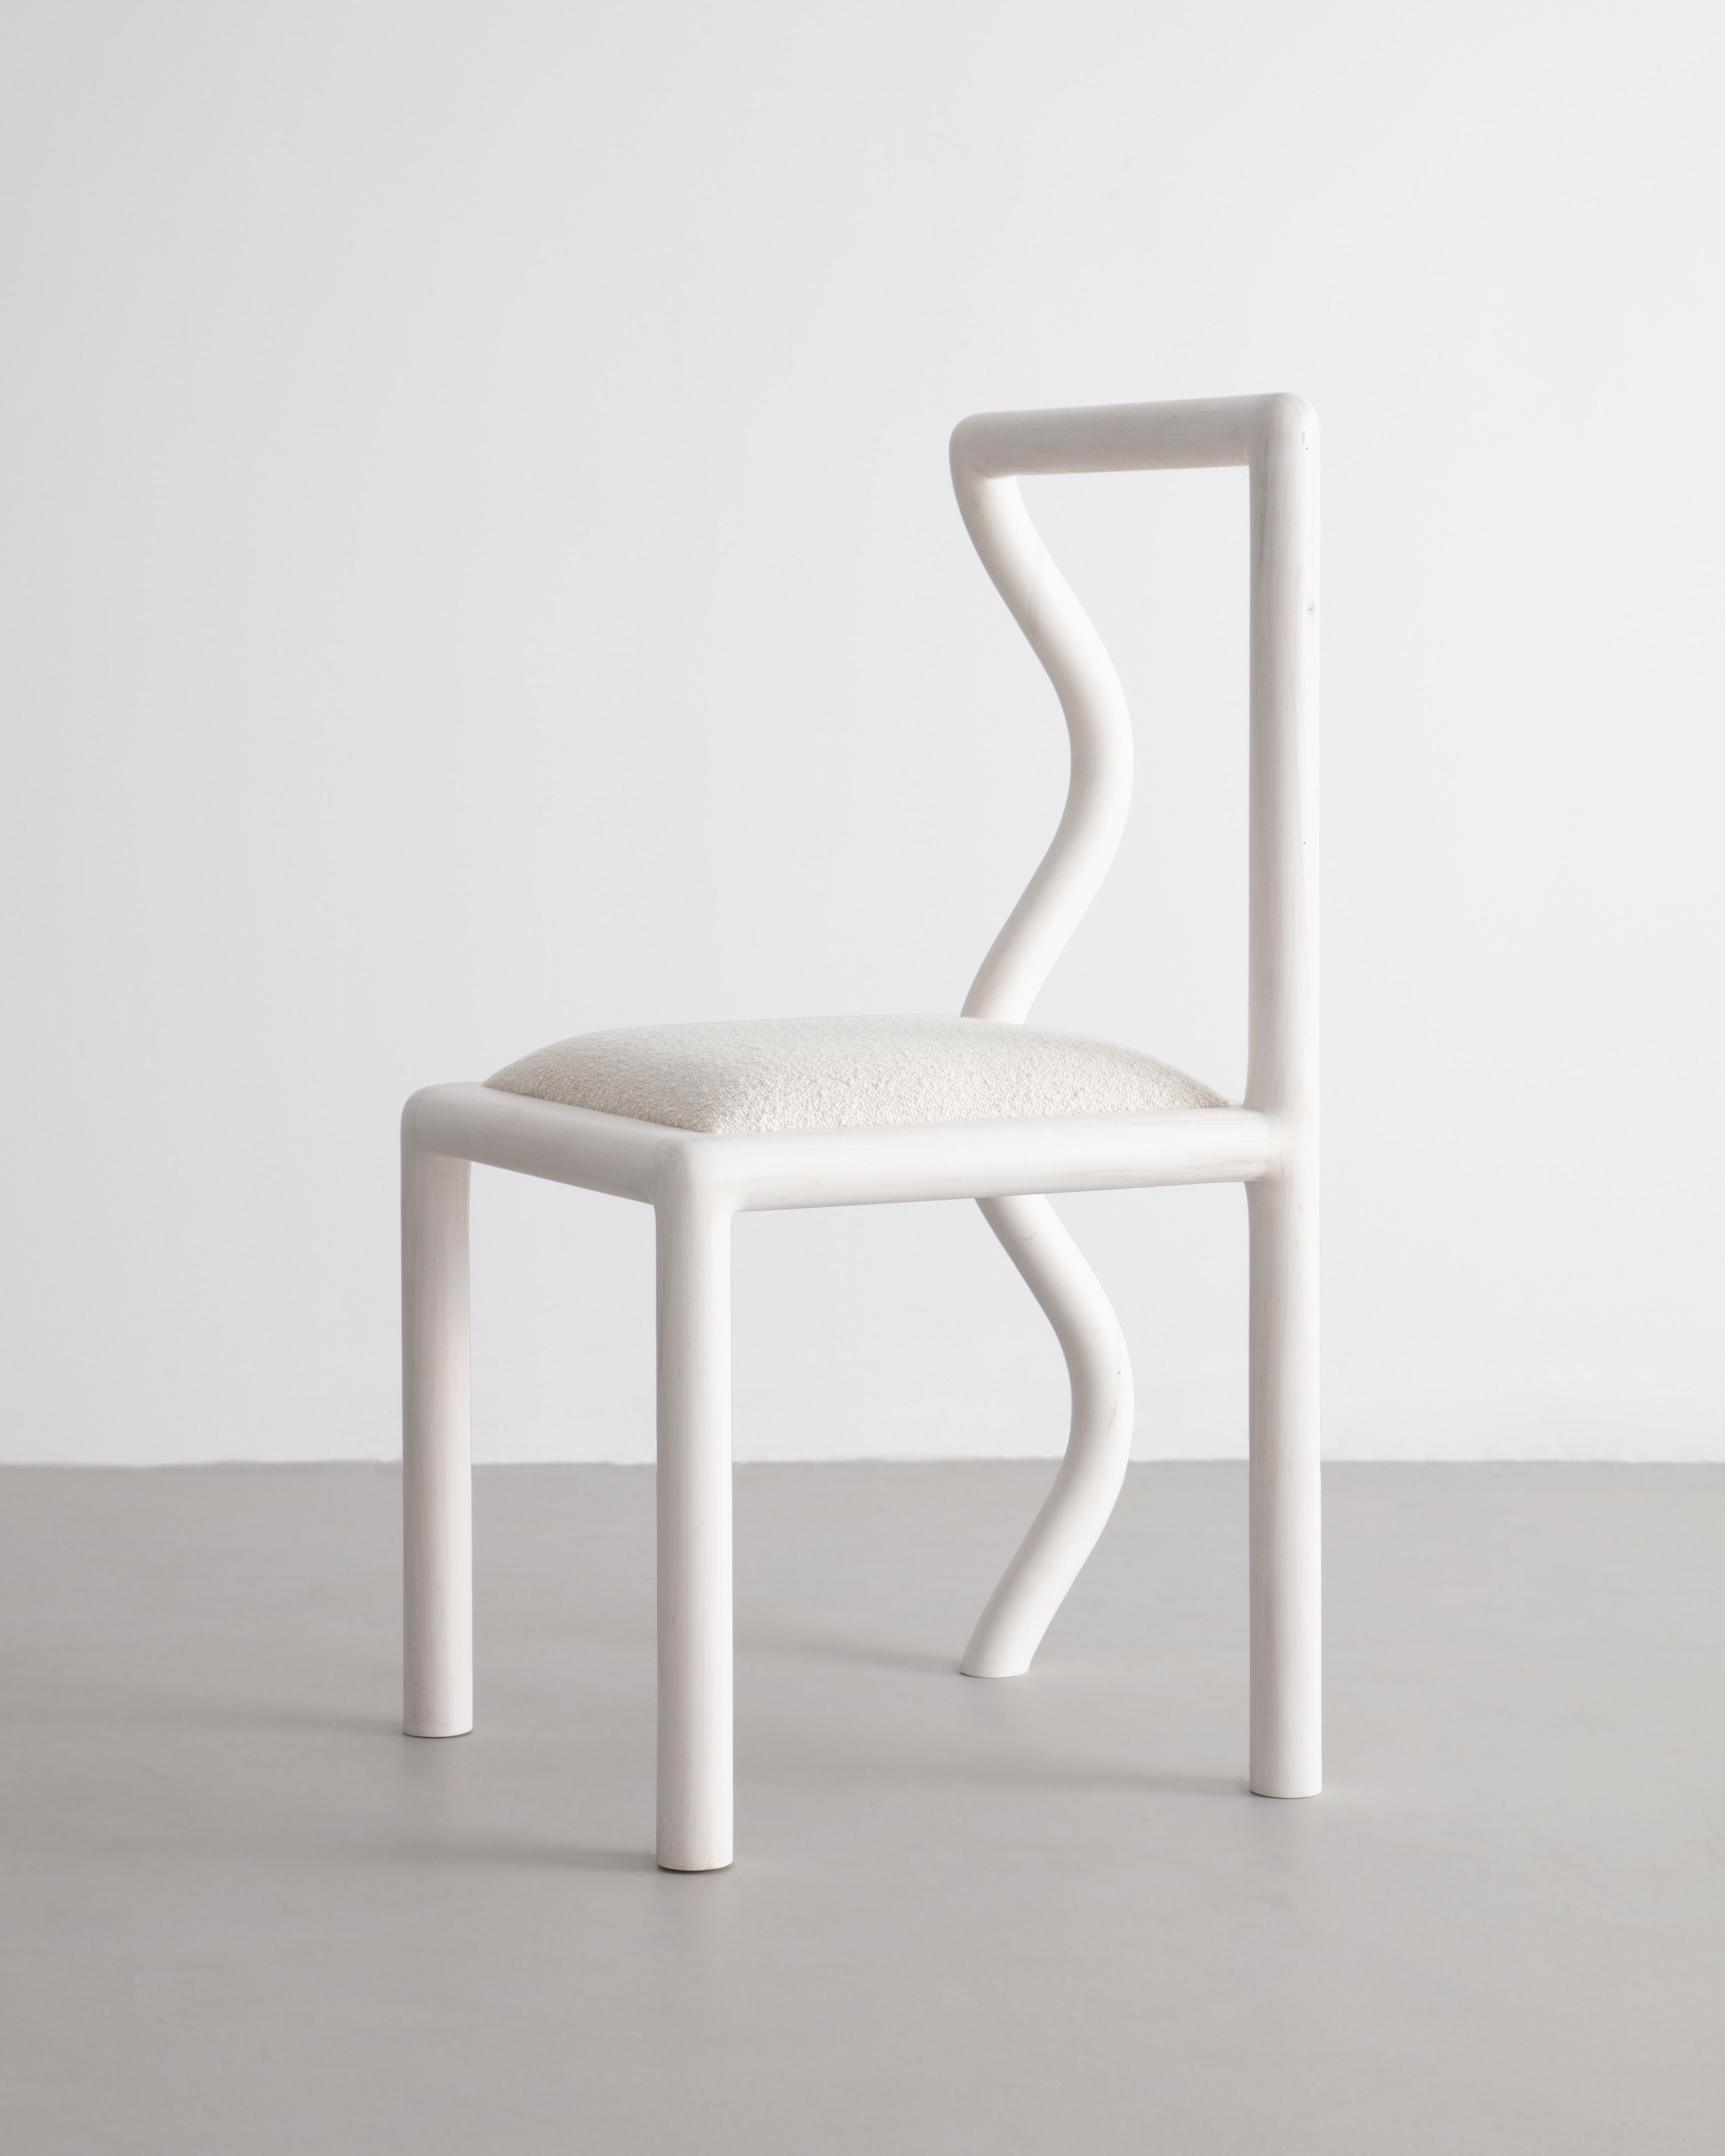 squiggly chair